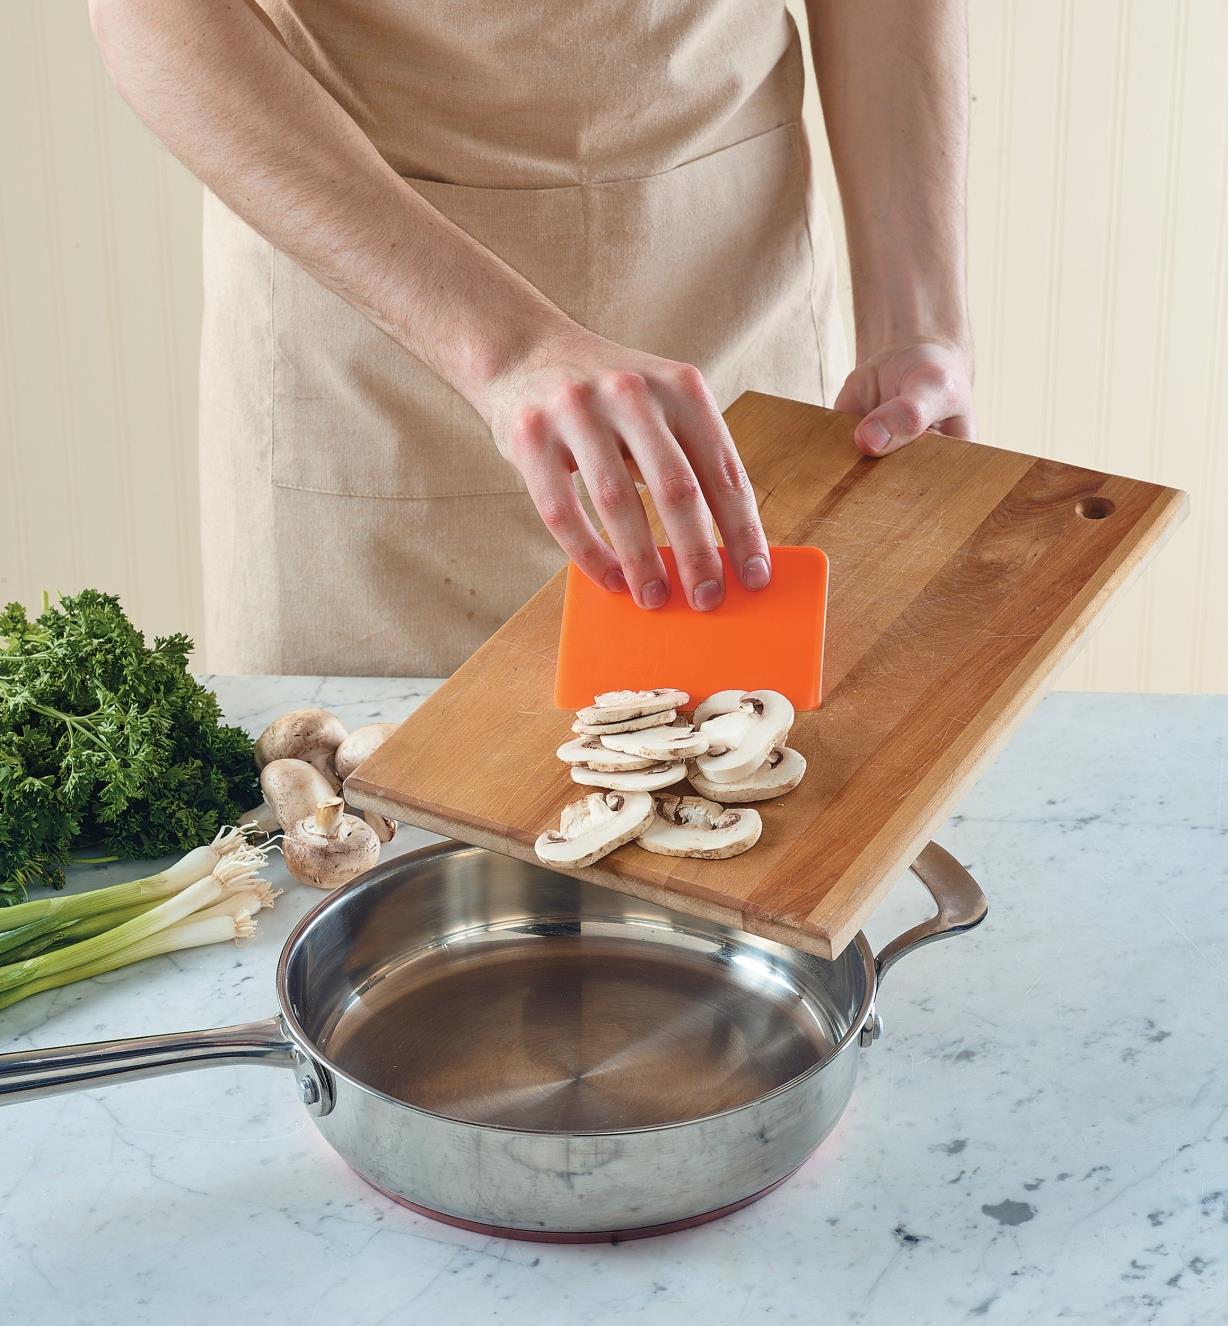 Using the food prep scraper to transfer sliced mushrooms from a cutting board into a saucepan